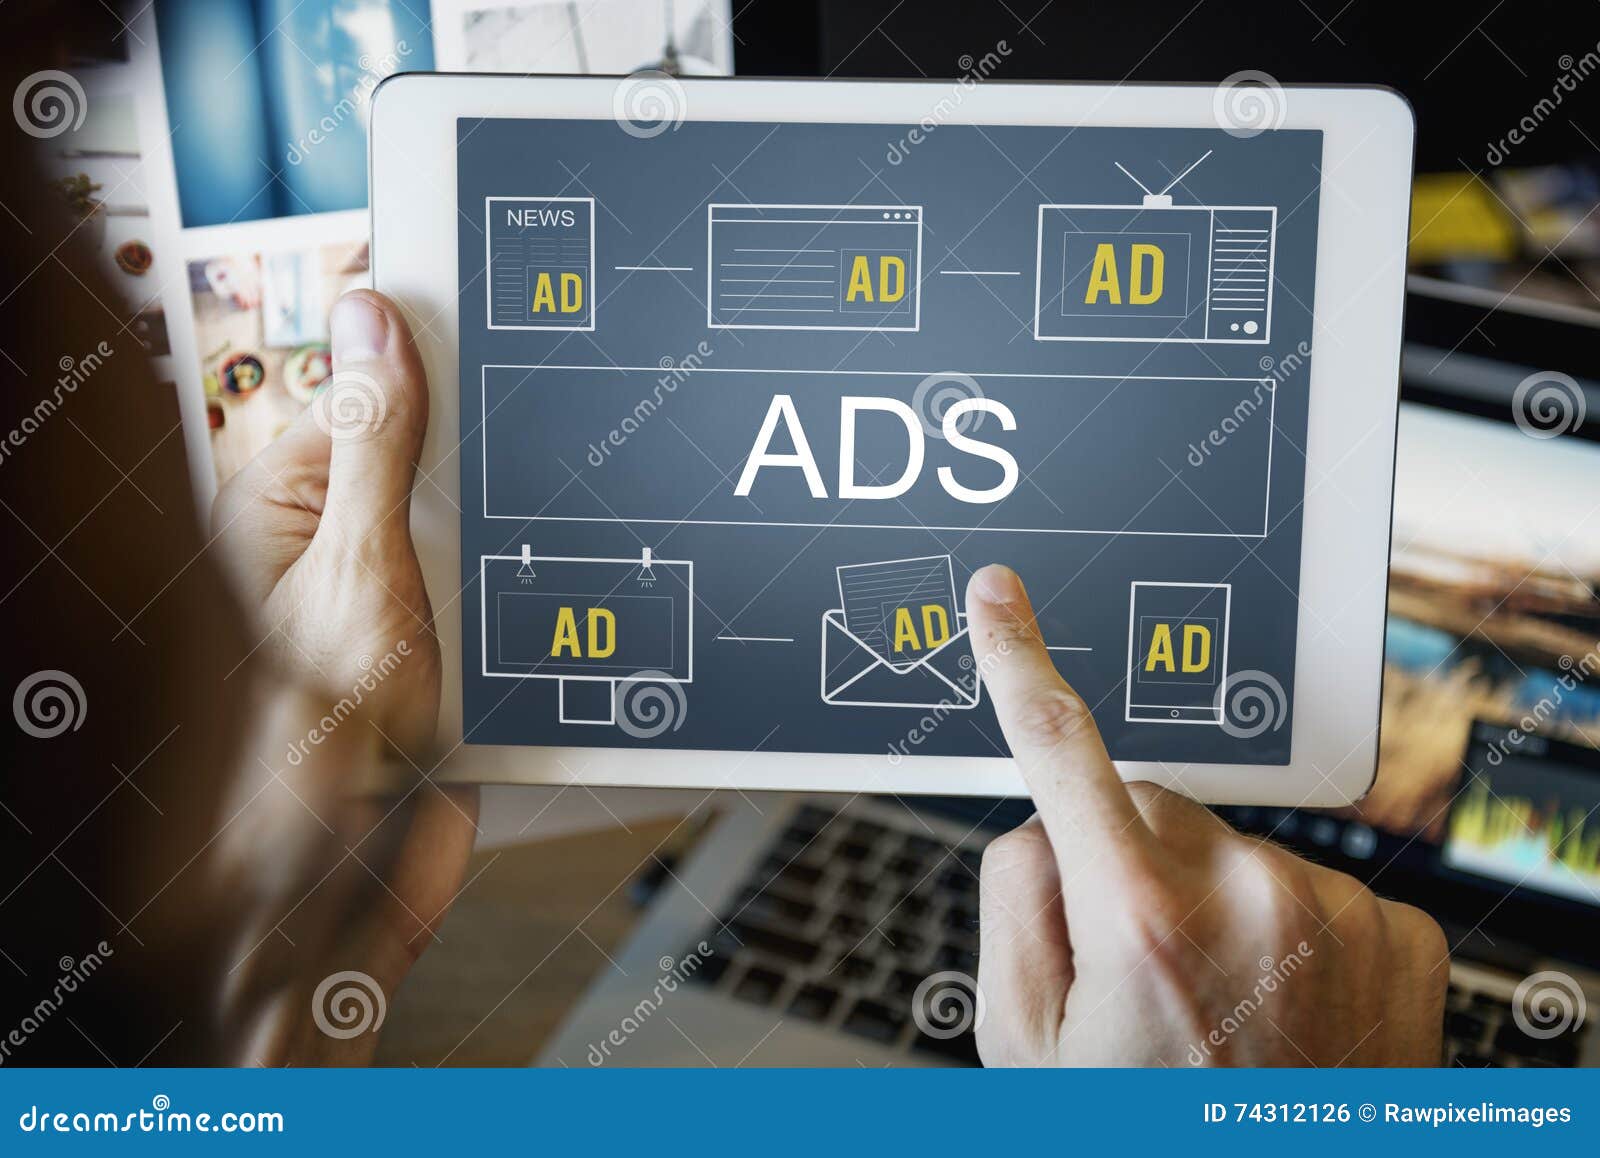 advertisement ads commercial marketing advertising branding concept